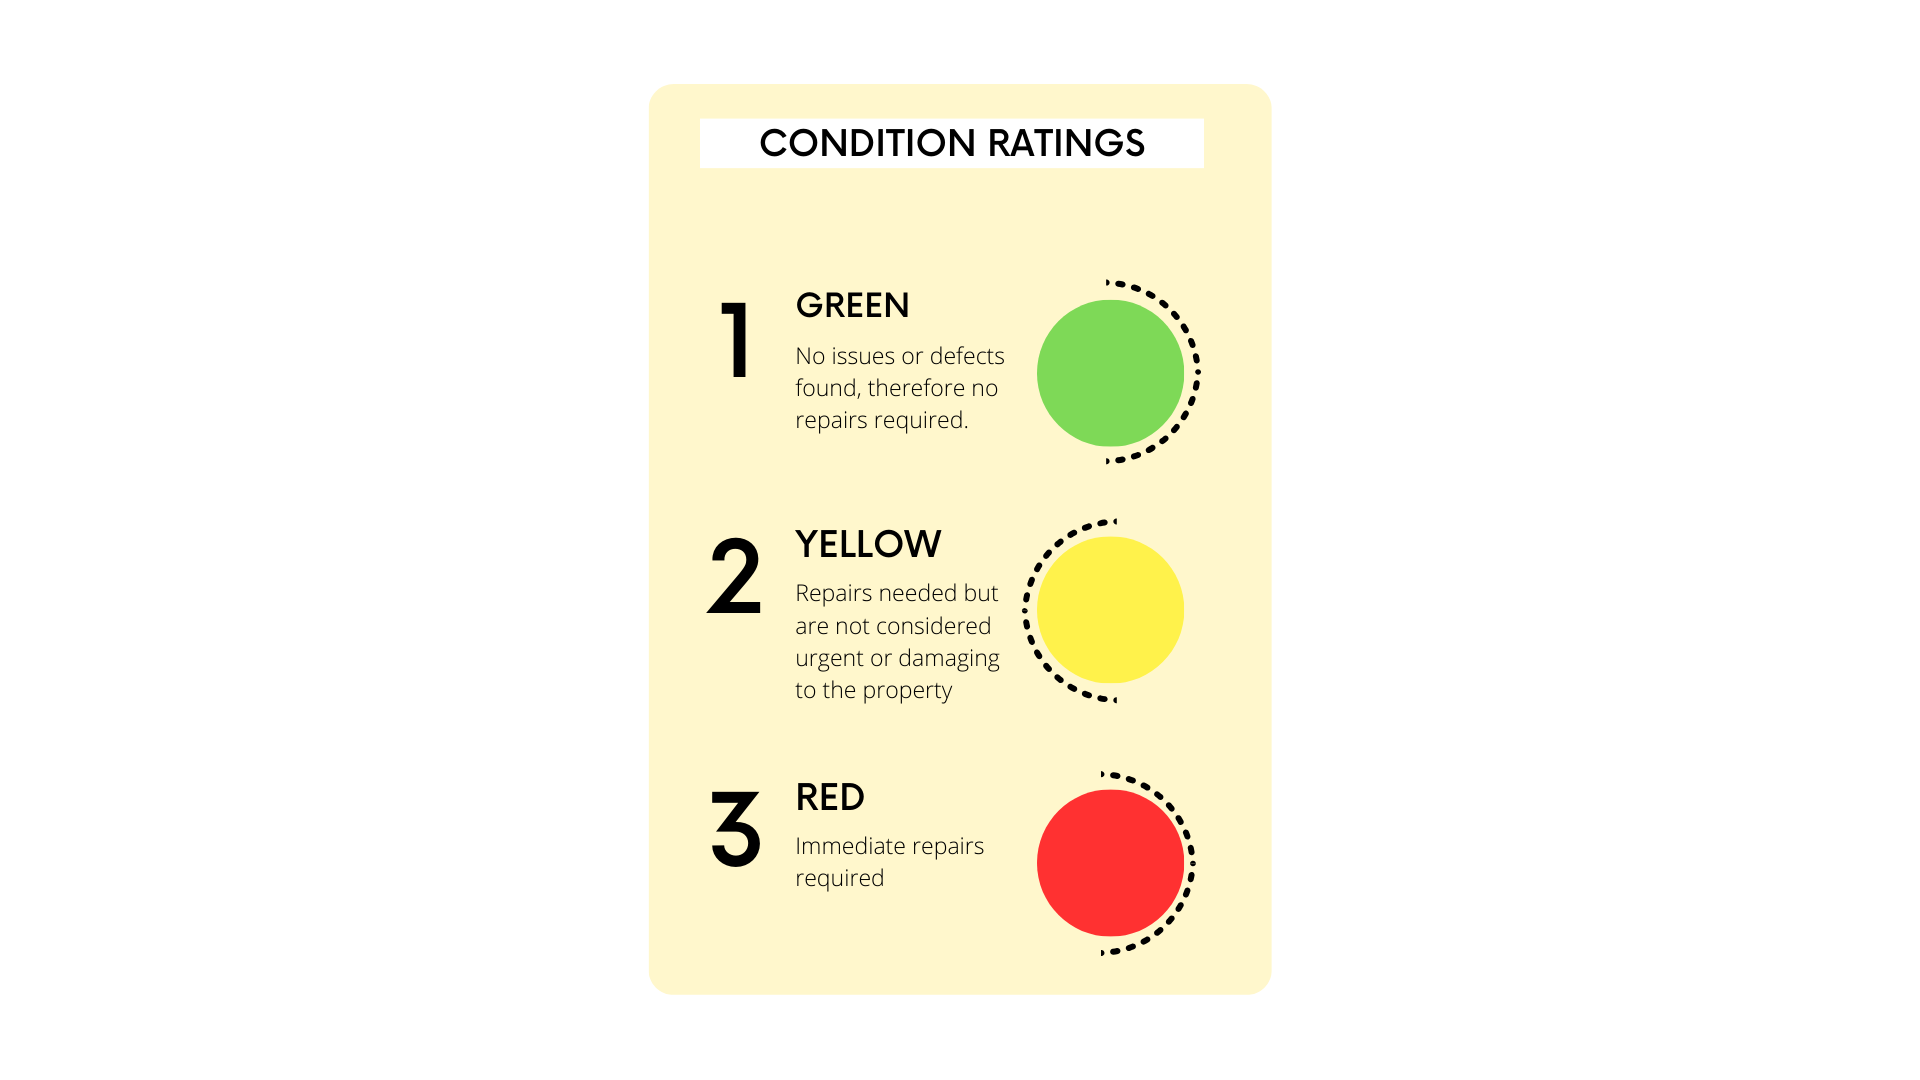 Condition ratings